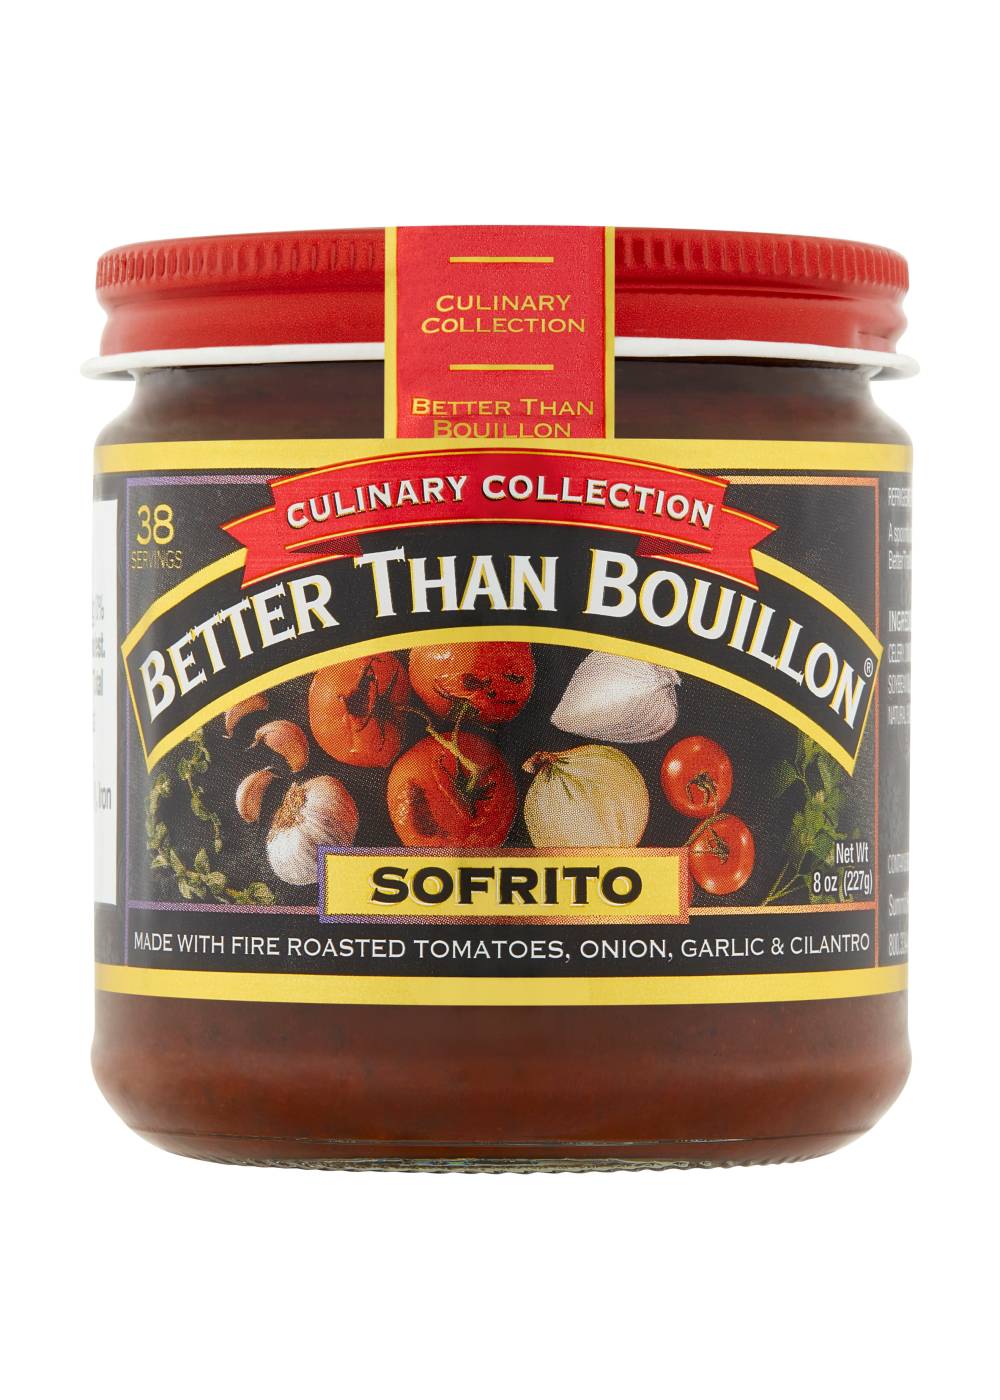 Better Than Bouillon Sofrito; image 1 of 2